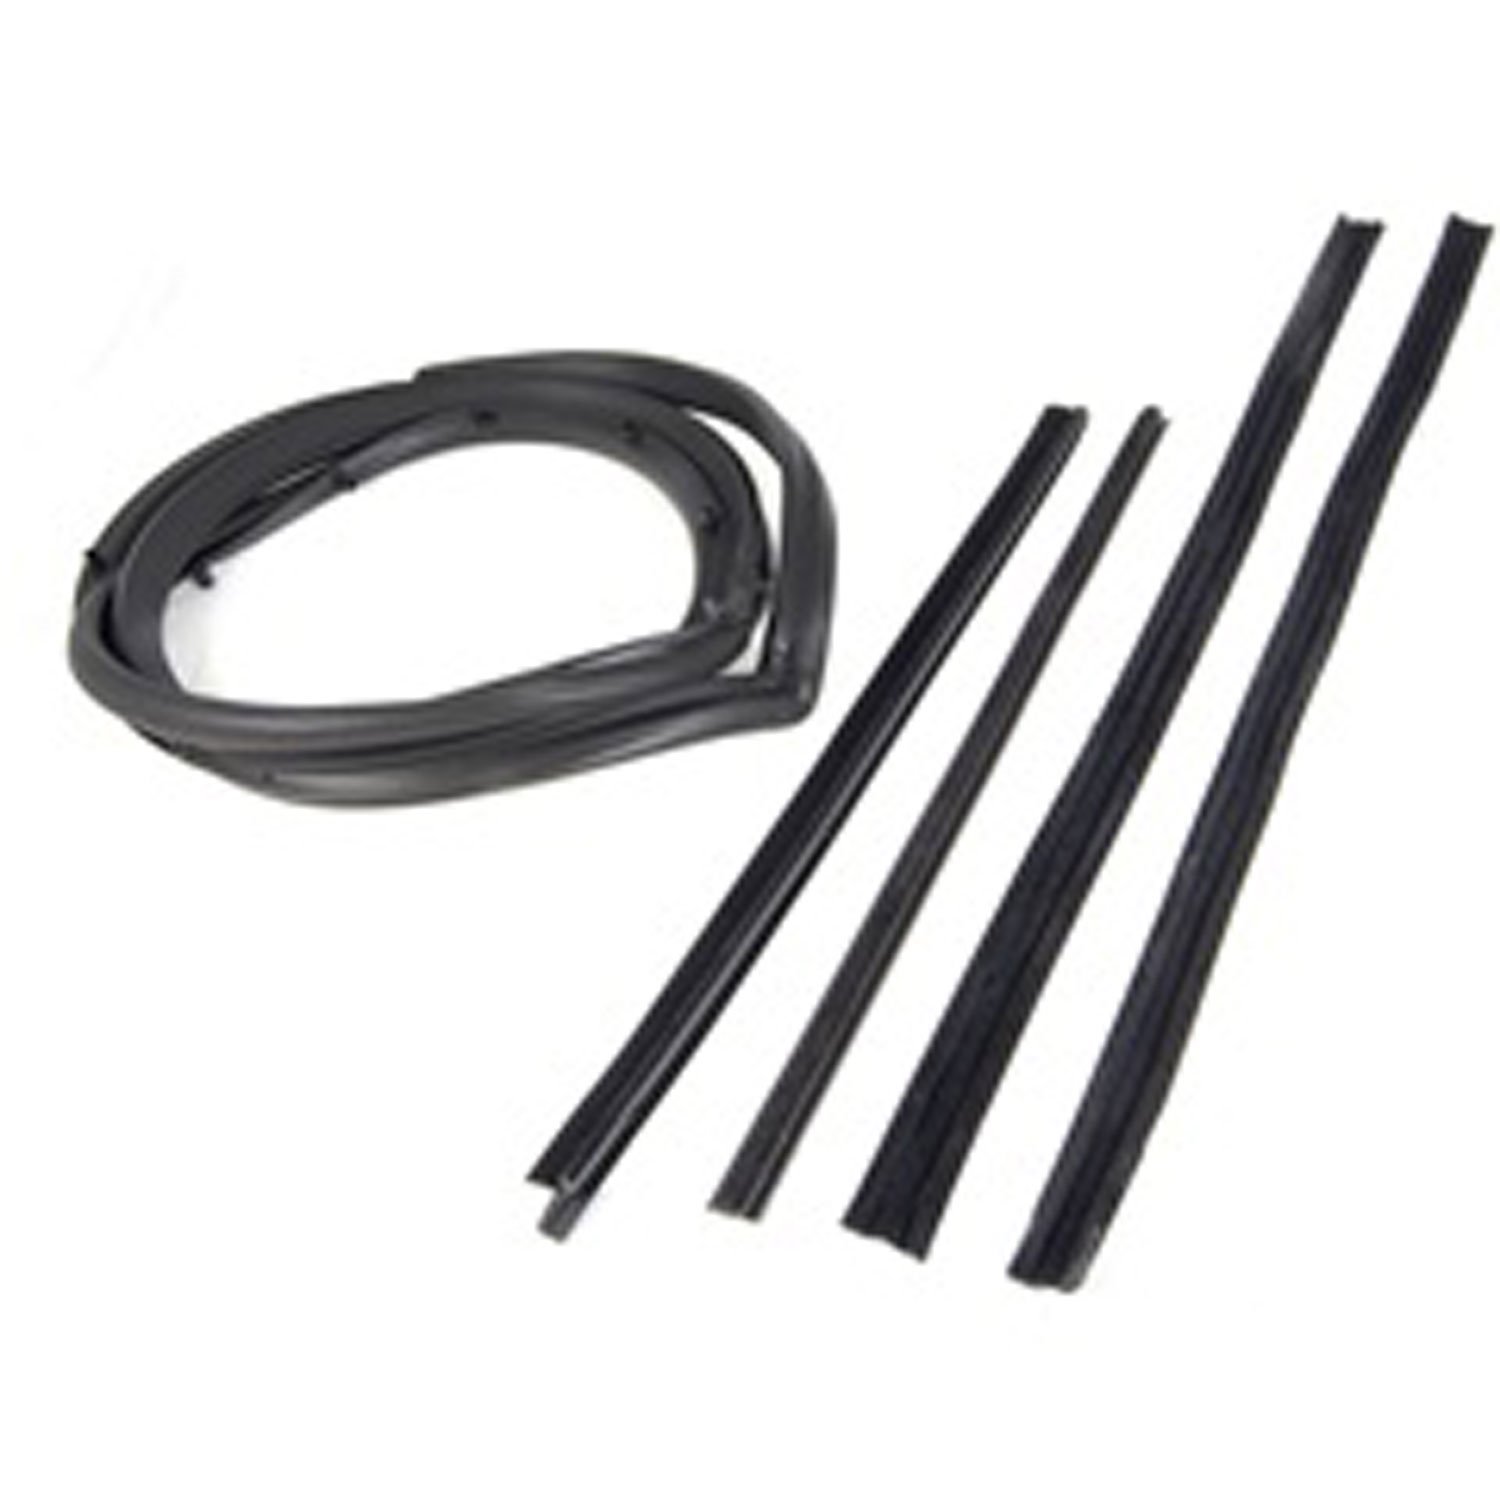 This 5 piece full door seal kit from Omix-ADA fits factory hard doors with a movable vent window. Fi